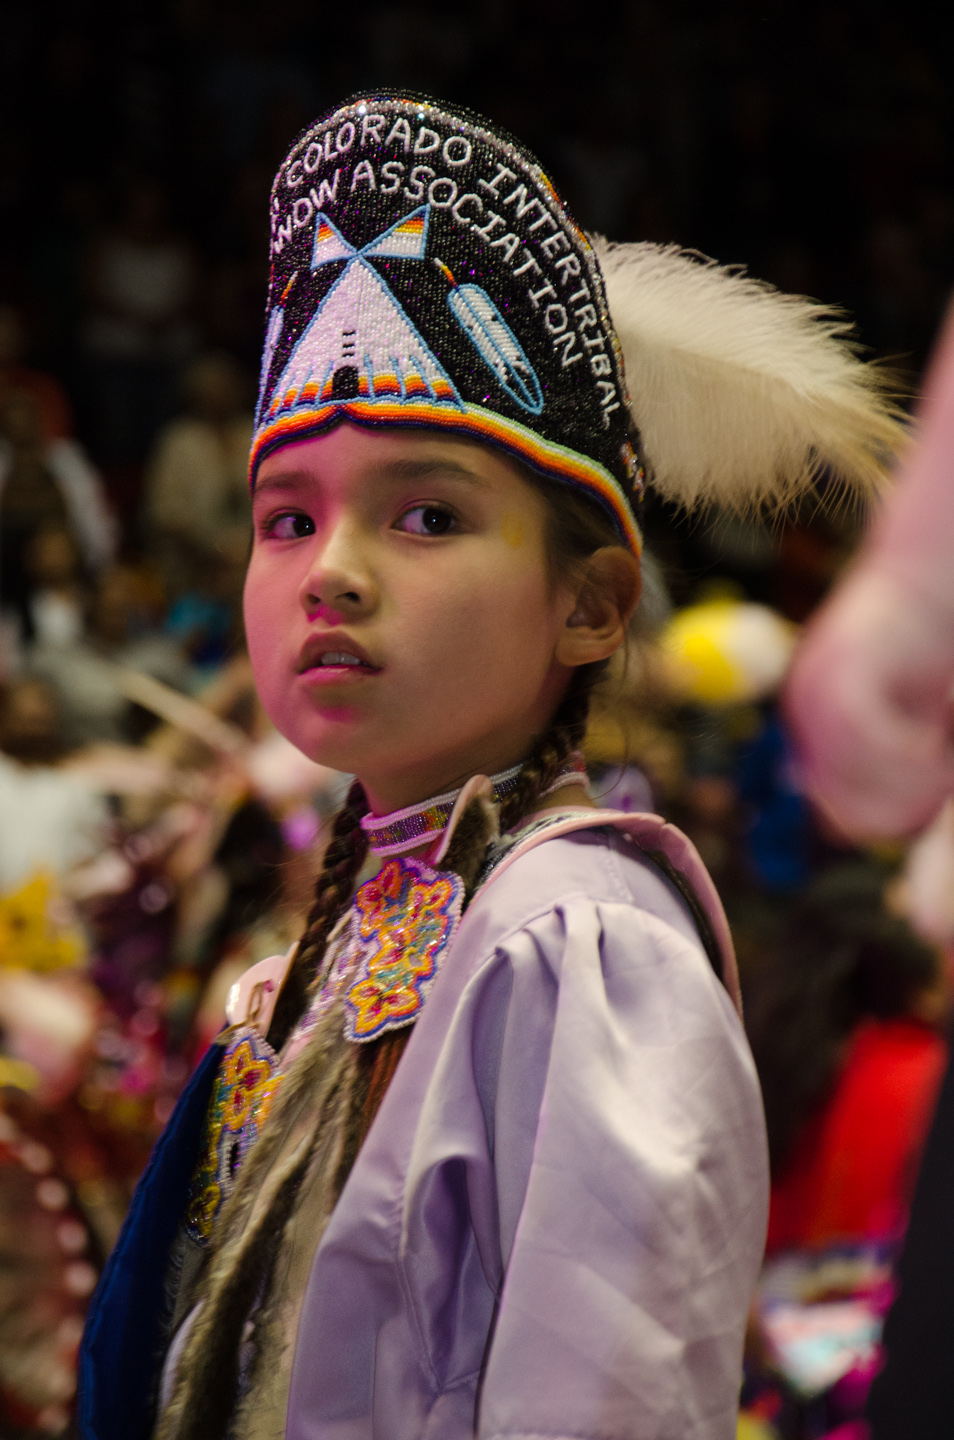 Avaleena Nanaeto was one of several who represented a younger Southern Ute generation at the Gathering of Nations. She also represents herself as royalty from the Colorado Intertribal Powwow Association.